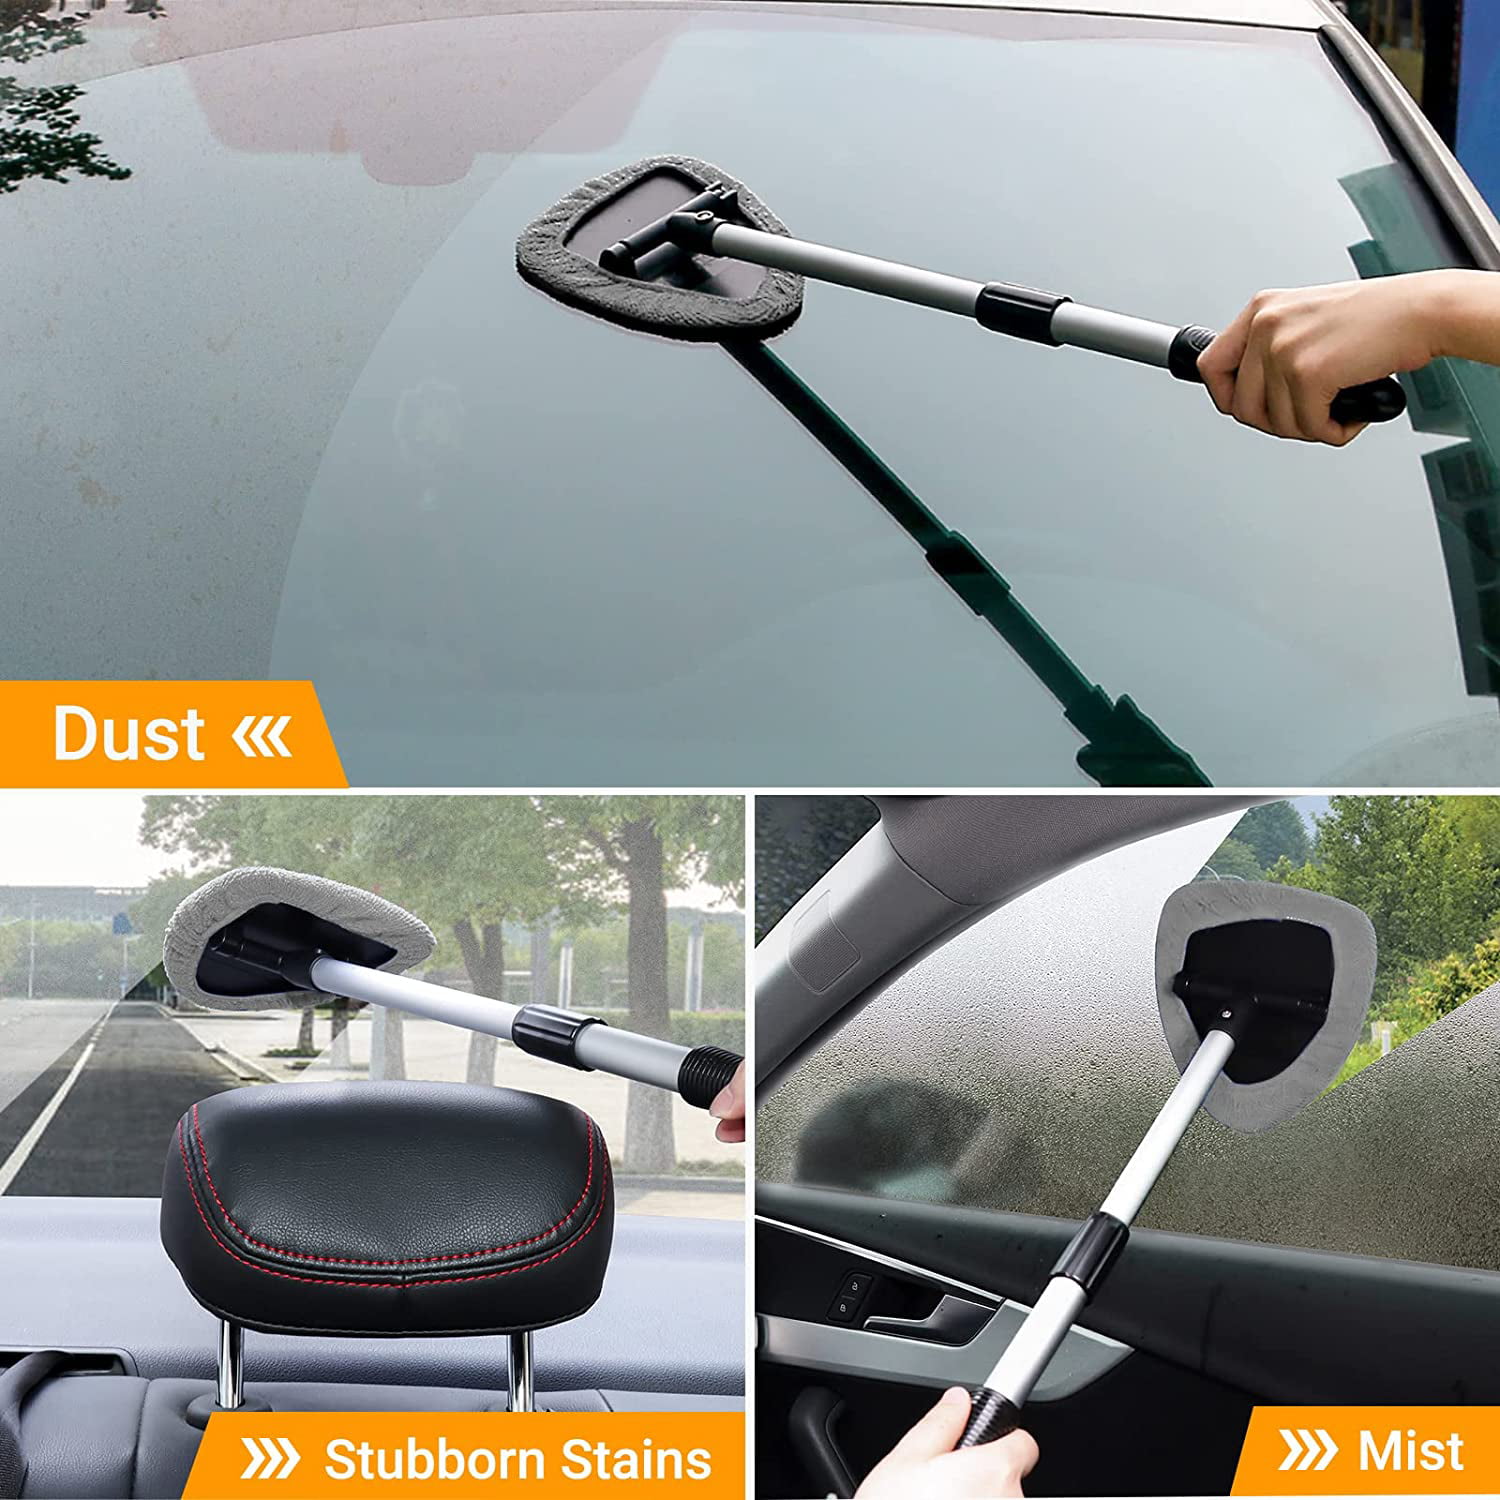 Electomania Windshield Clean Car Wiper Cleaner Glass Window Tool